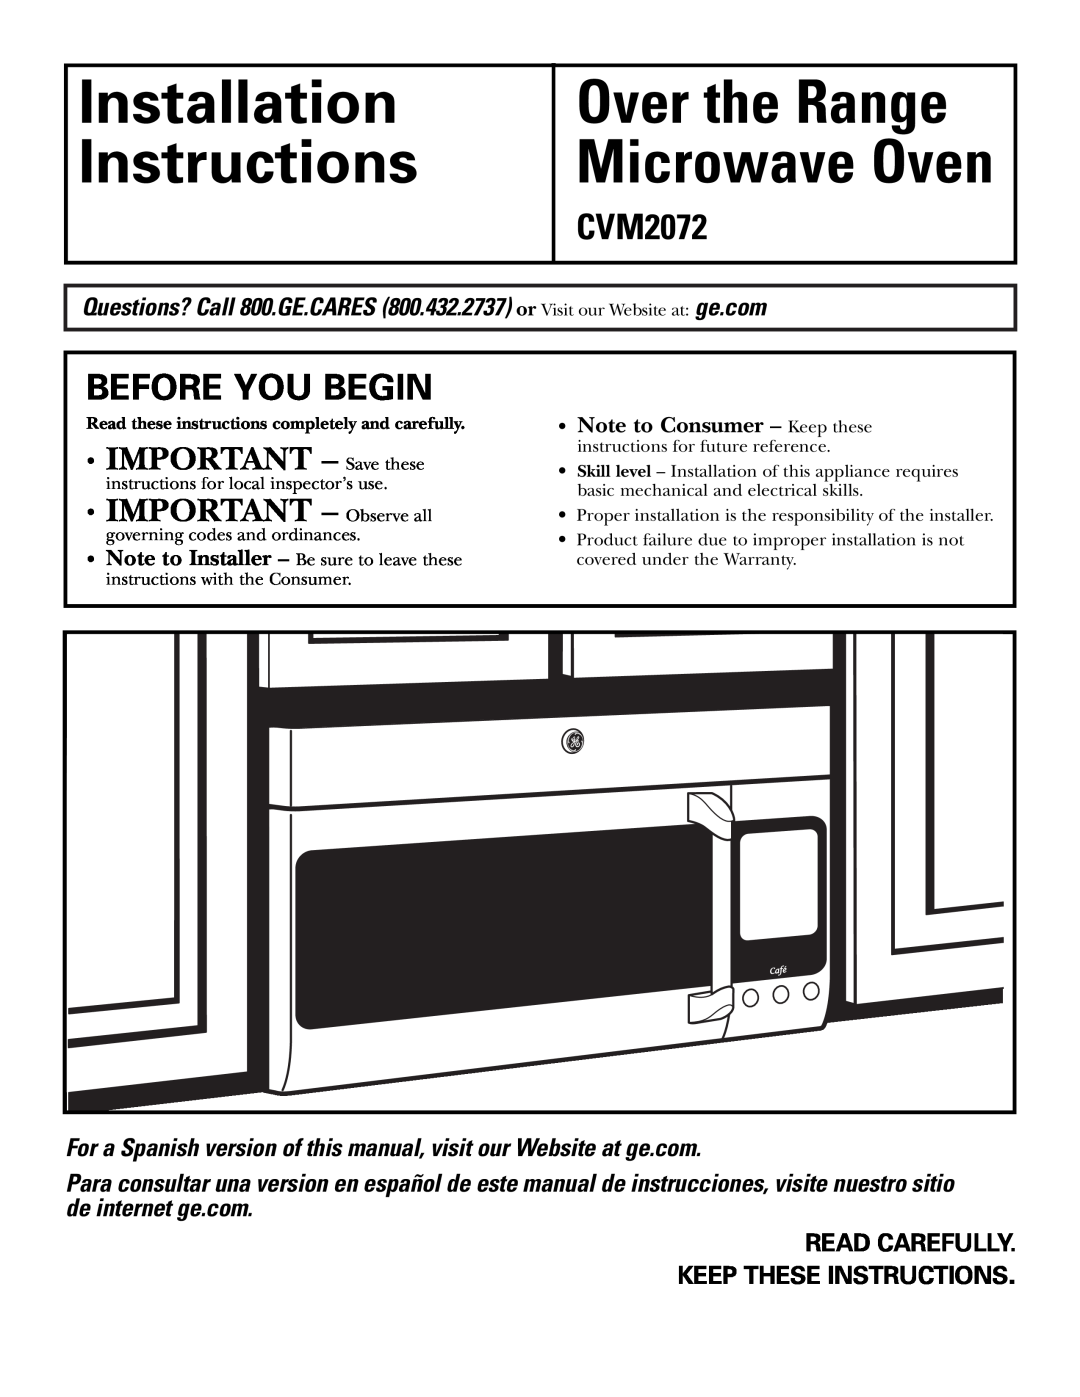 GE CVM2072 warranty Installation Instructions, Before You Begin, IMPORTANT - Save these, IMPORTANT - Observe all 